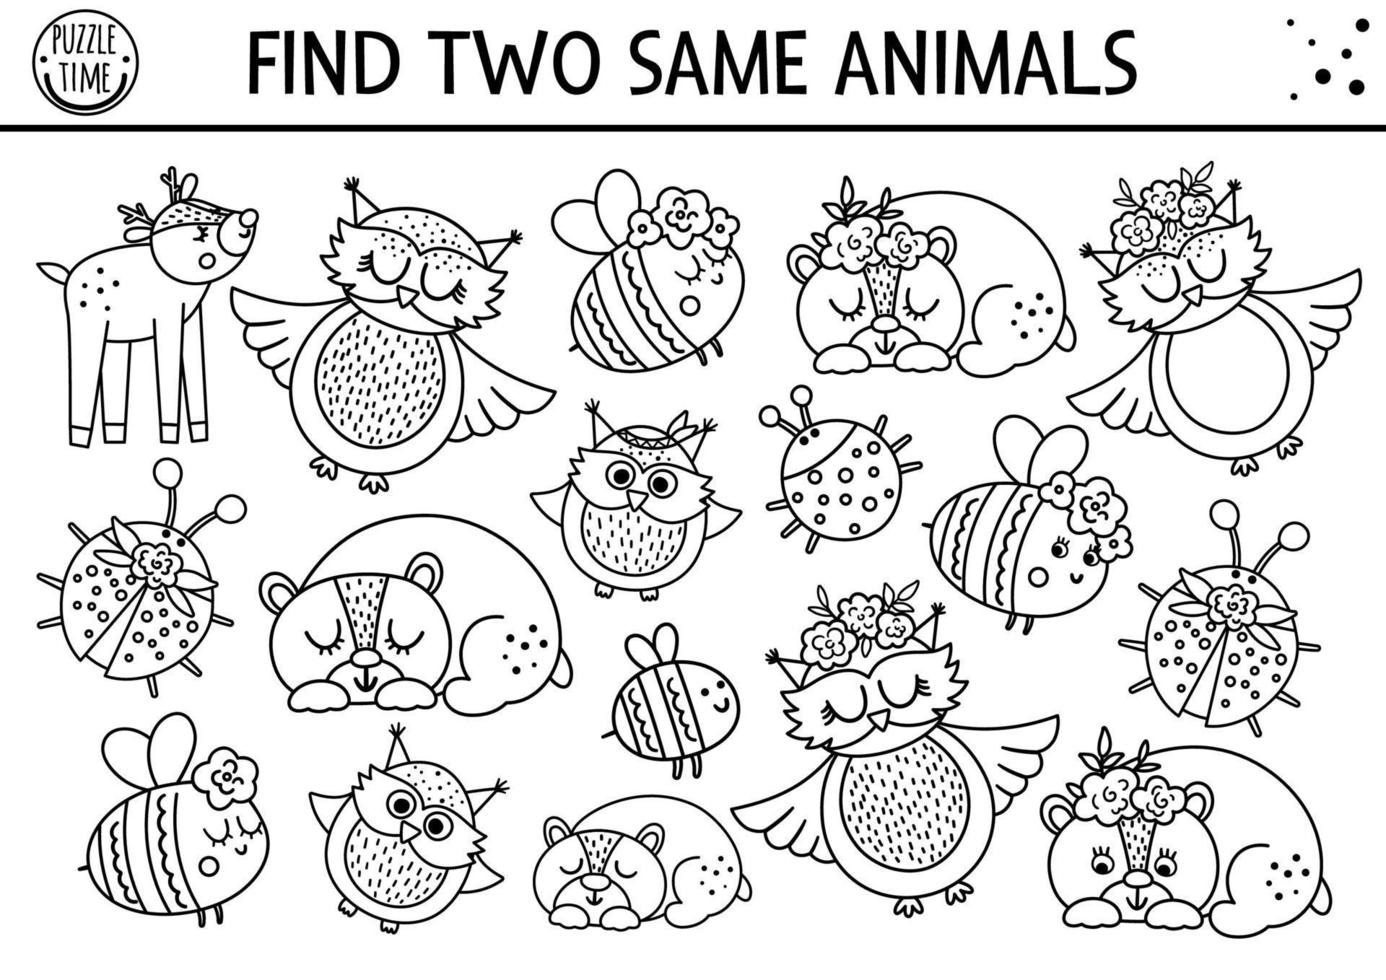 Find two same animals. Mothers day black and white matching activity for children. Funny spring logical quiz worksheet for kids. Simple printable line game or coloring page with cute animals vector